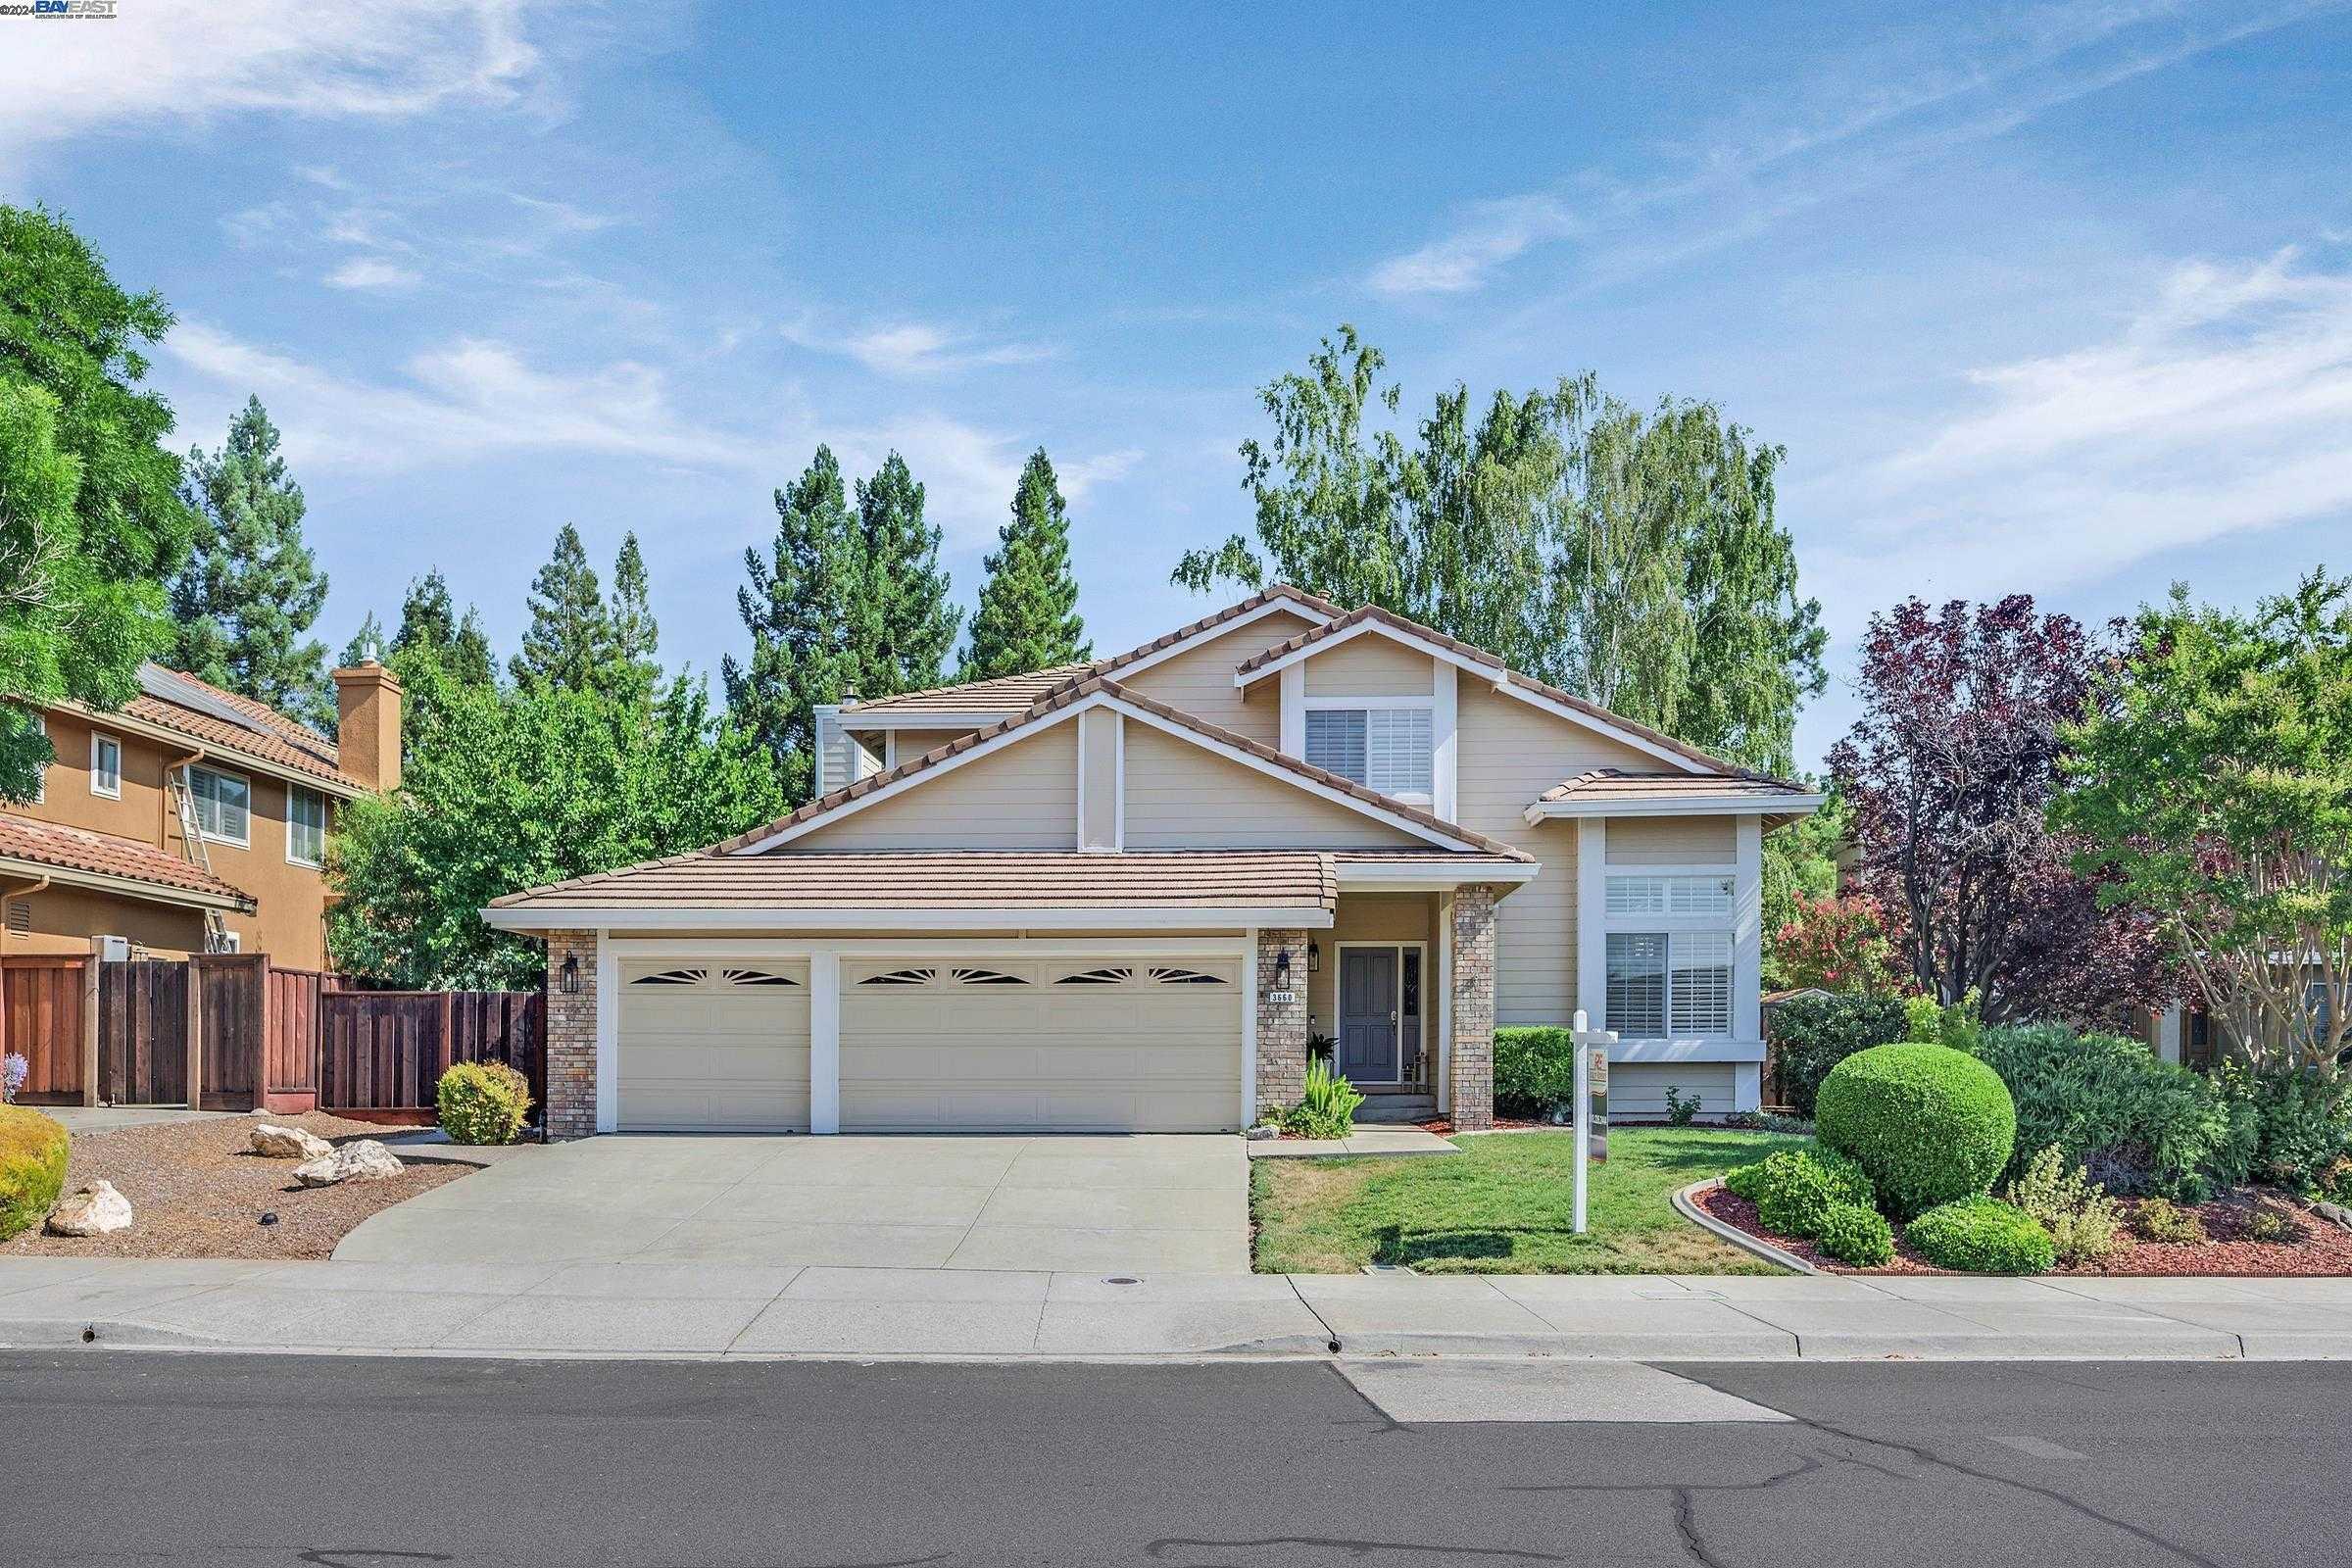 3660 Edinburgh Dr., 41066455, Livermore, Detached,  for sale, Lorenzo King, REALTY EXPERTS®